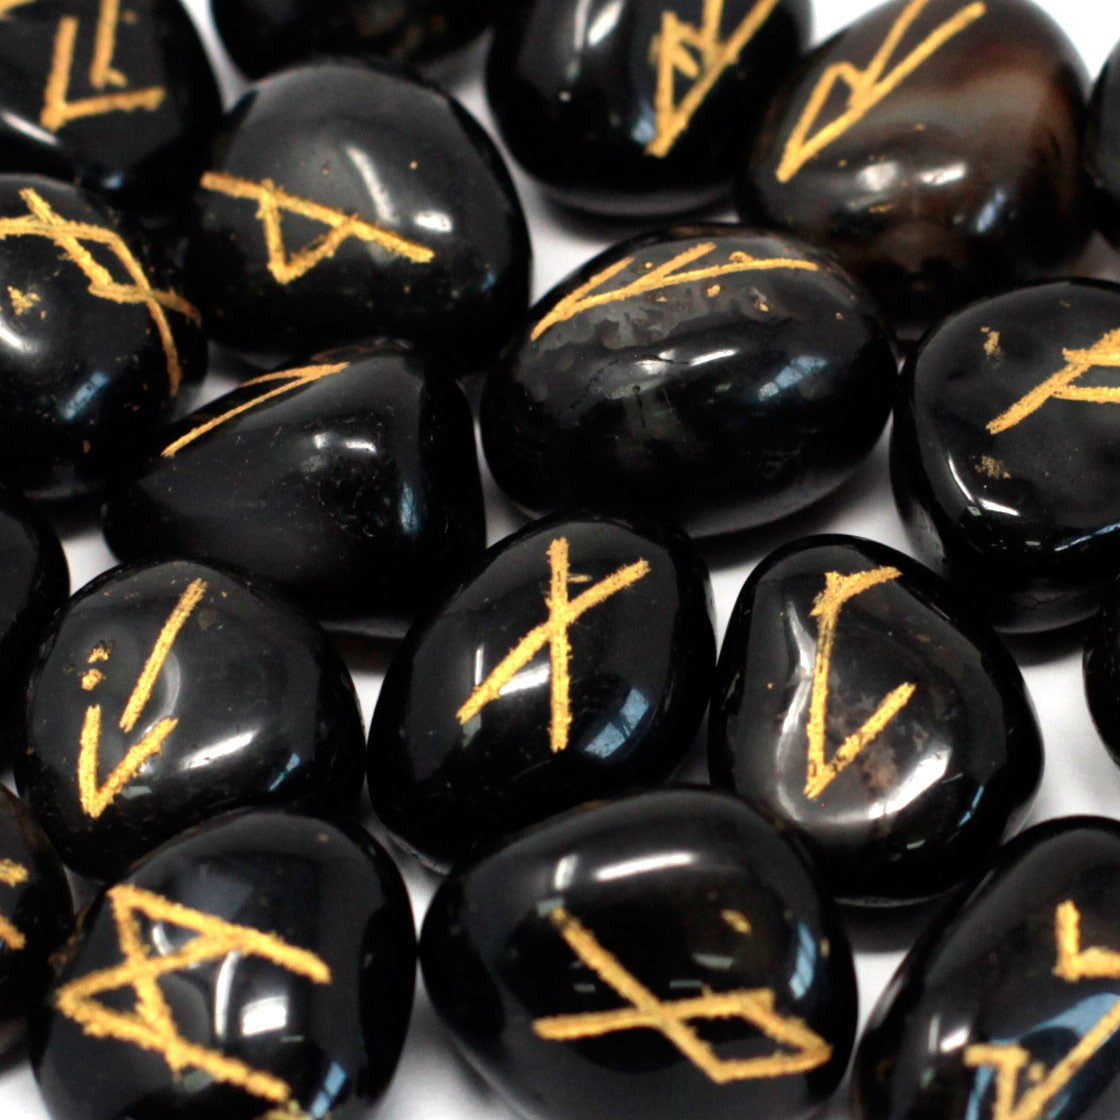 View Runes Stone Set in Pouch Black Onyx information